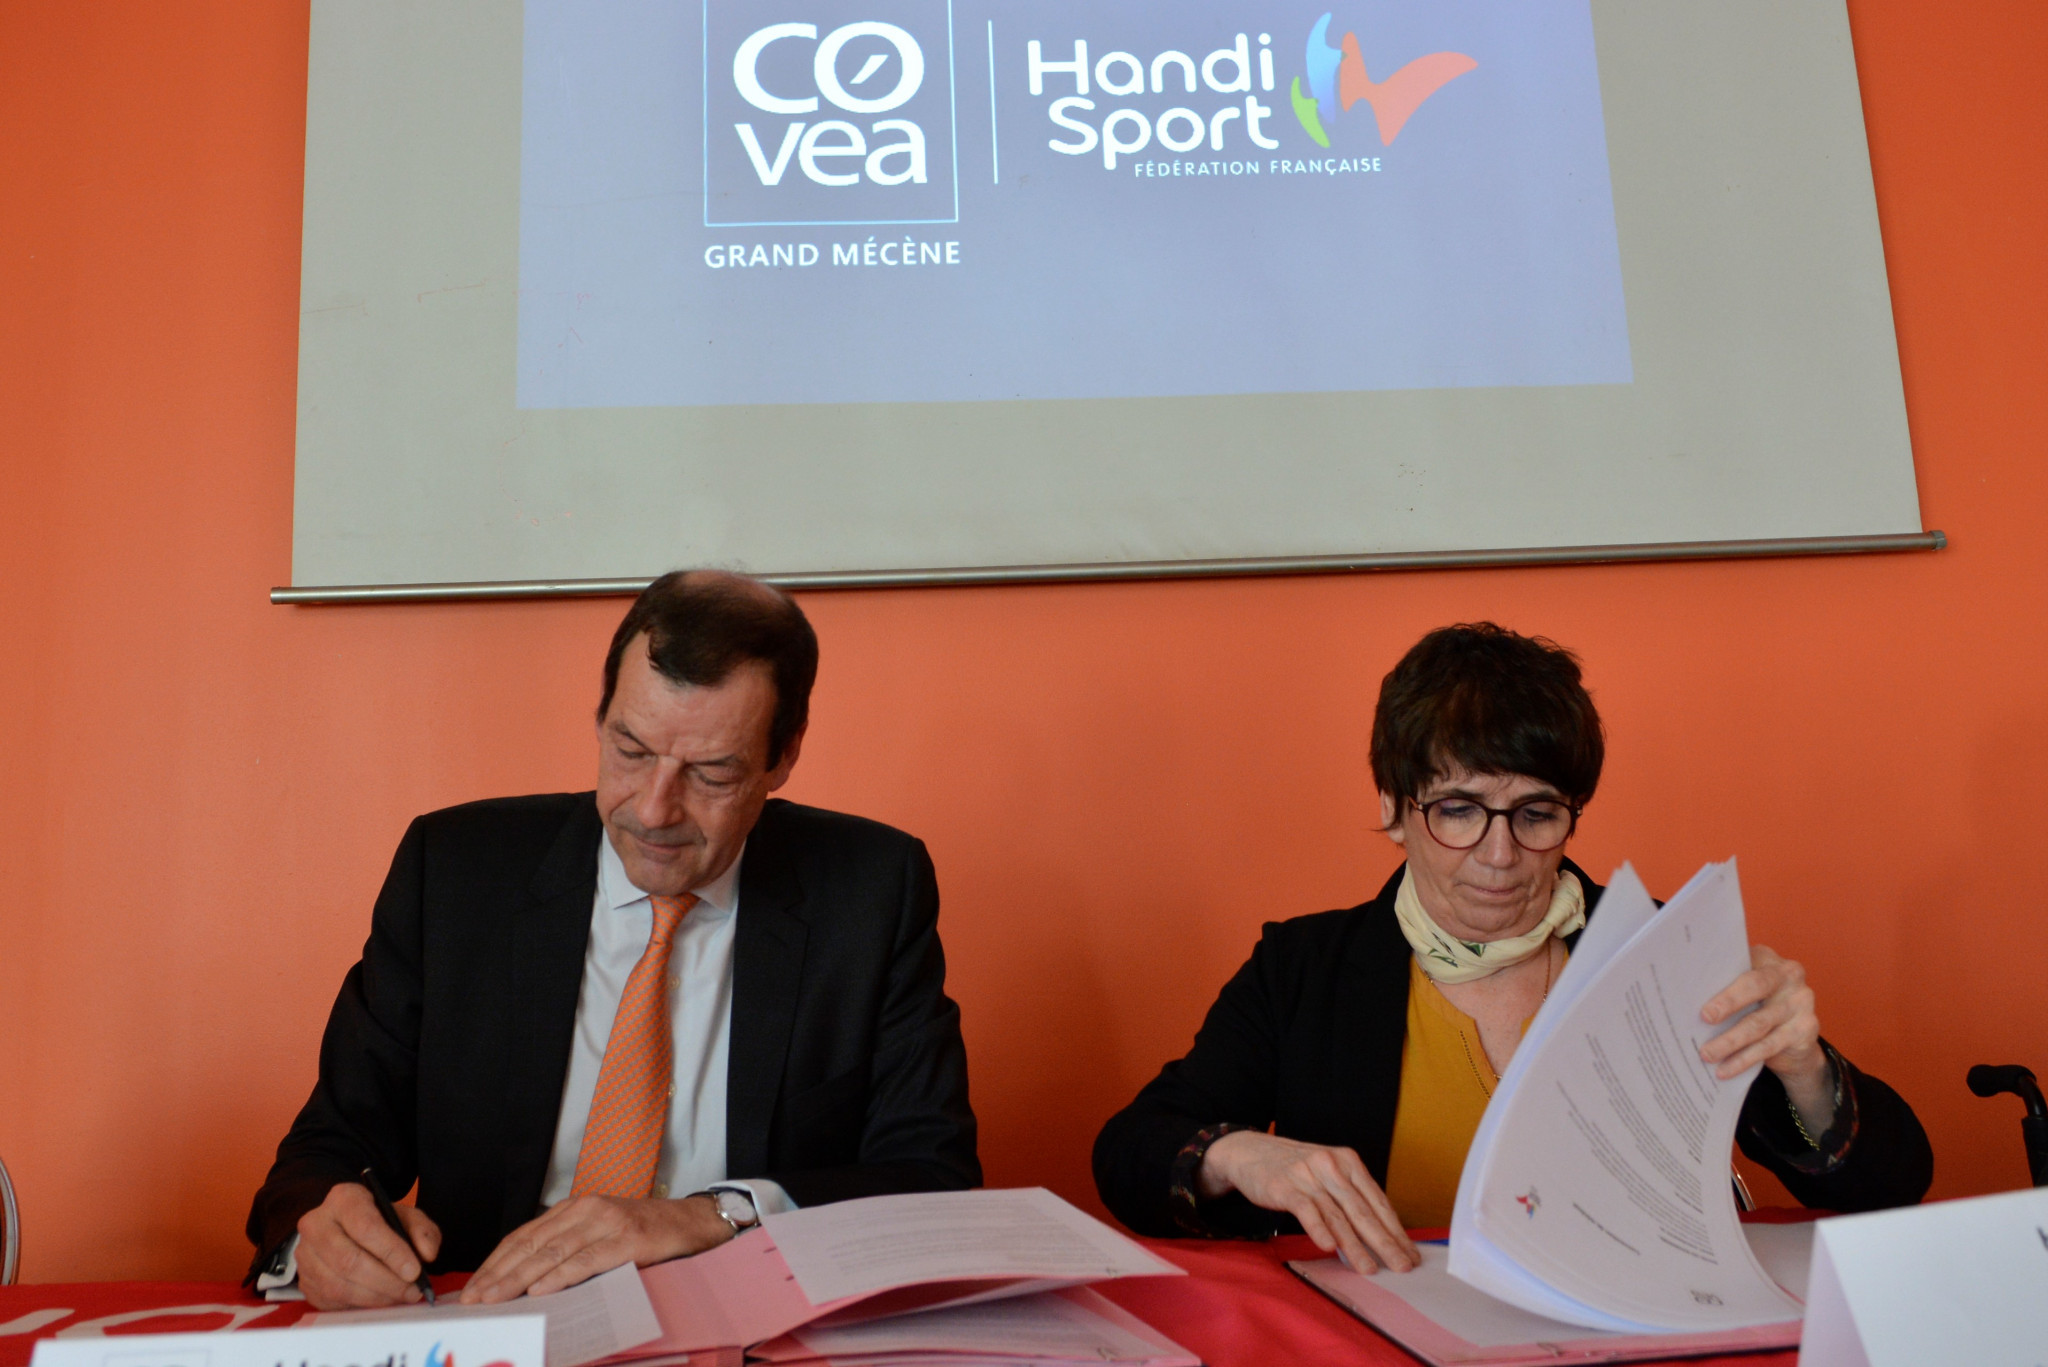 Covéa to fund French Handisport Federation programme attracting young people to sport 